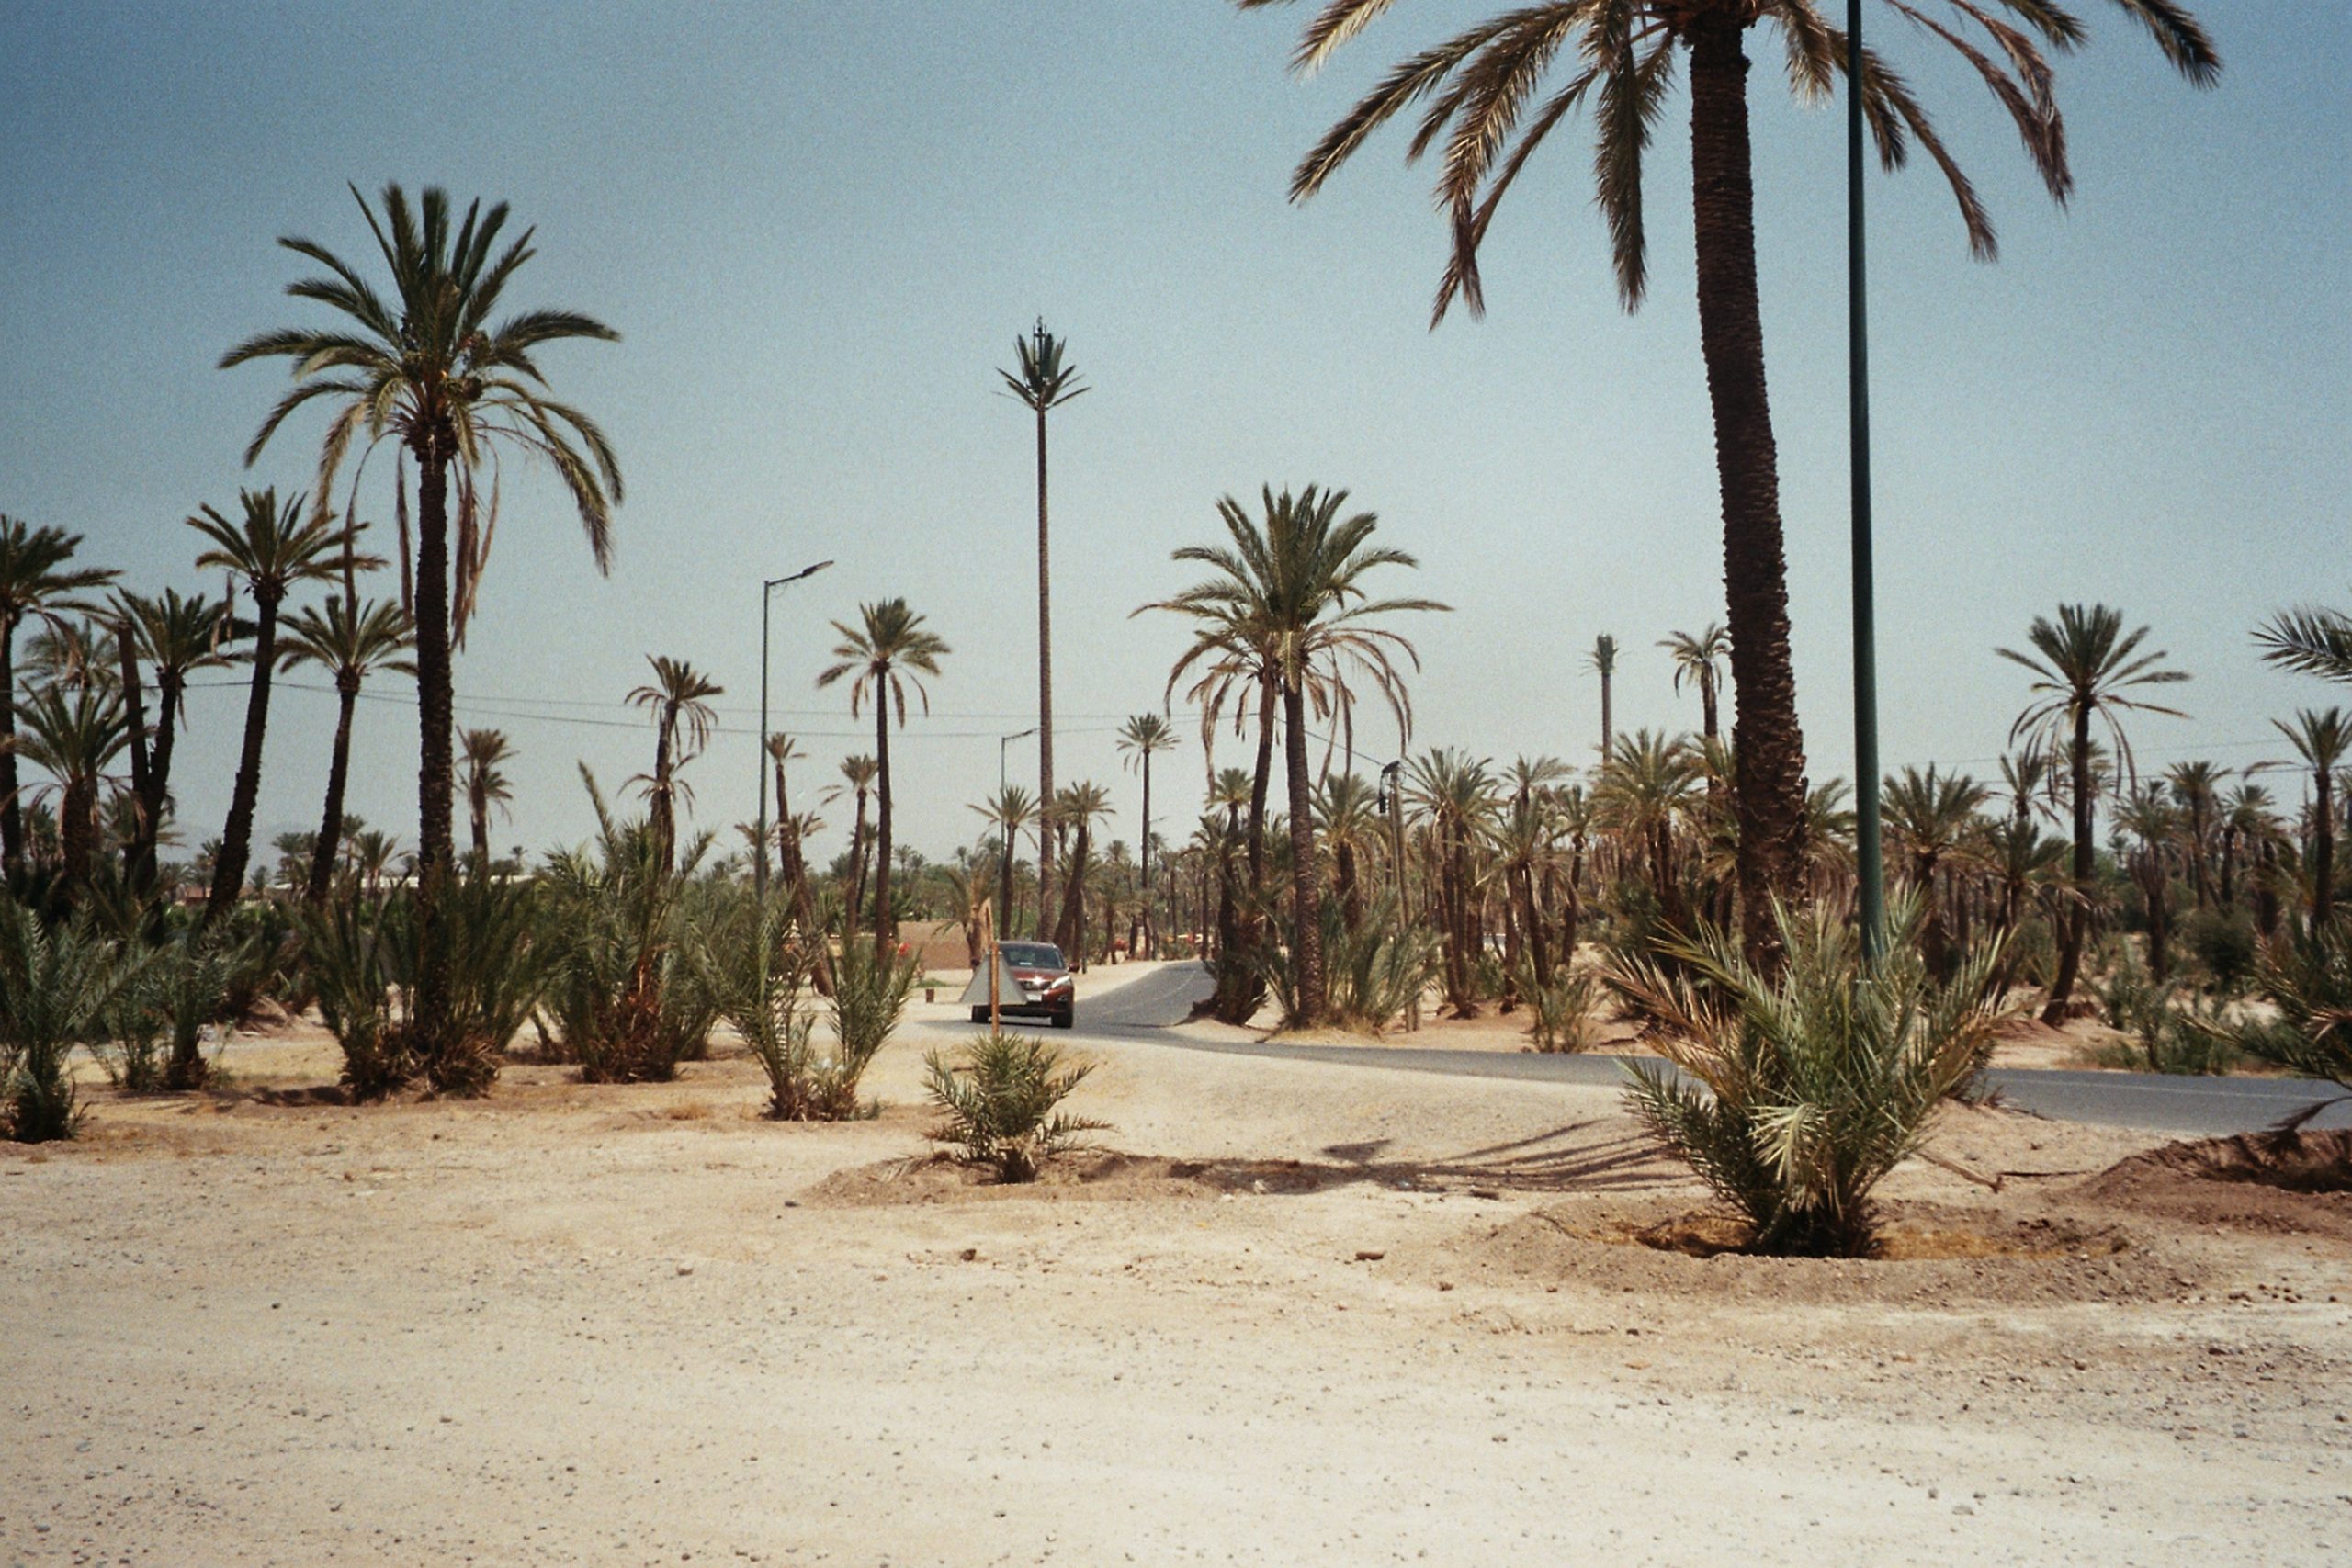 gallery image for Shared Quad Biking Activity Palm Oasis Marrakech